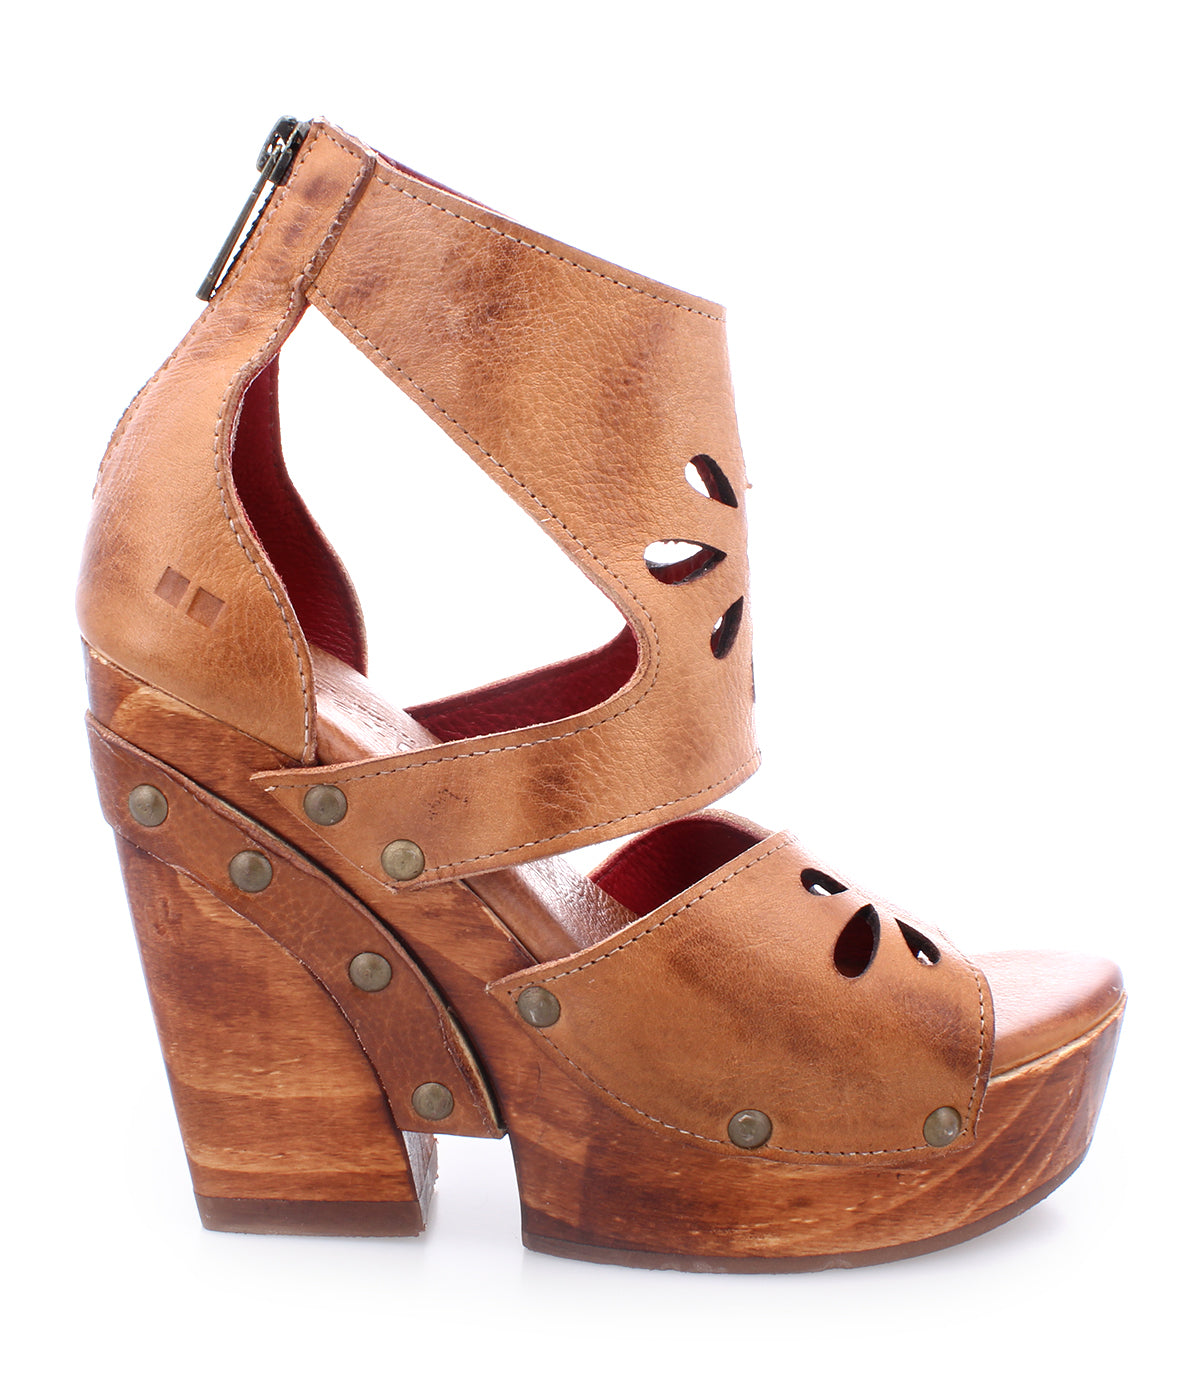 A women's sandal with a wooden platform and leather straps from Bed Stu's Lucrative collection.